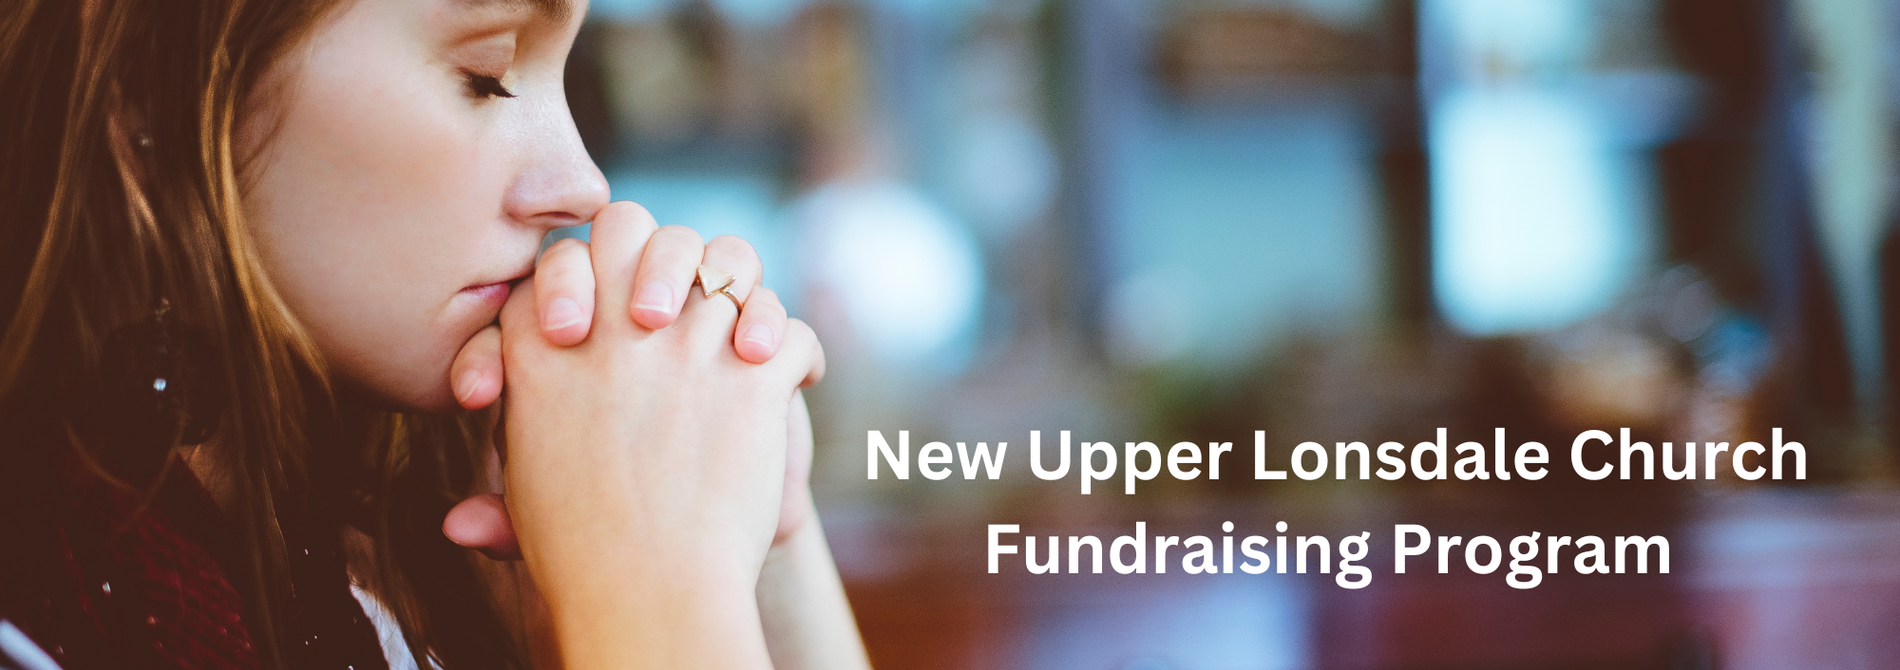 Upper Lonsdale Church Fundraising